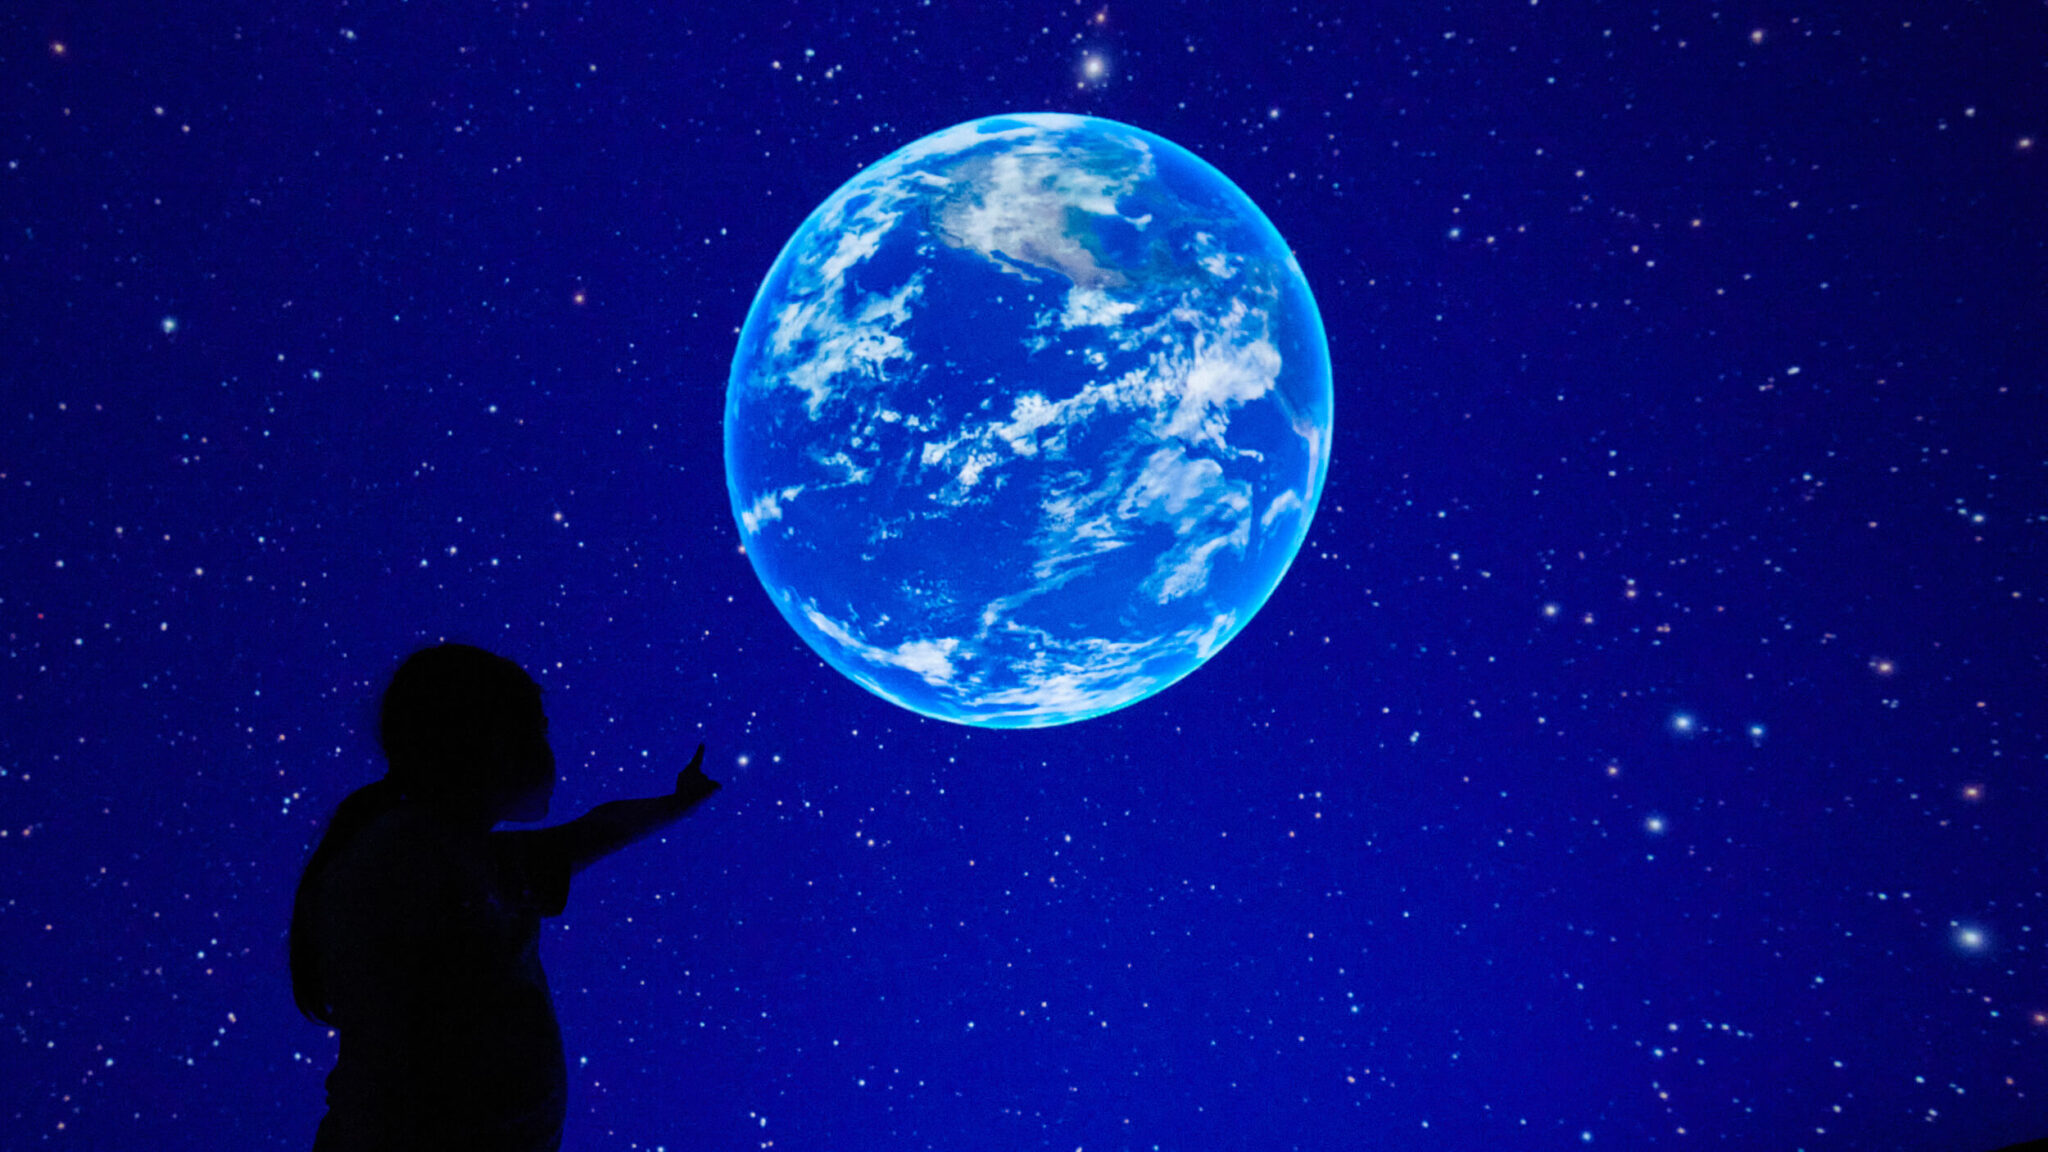 Silhouette of a child pointing at a picture of the earth in space